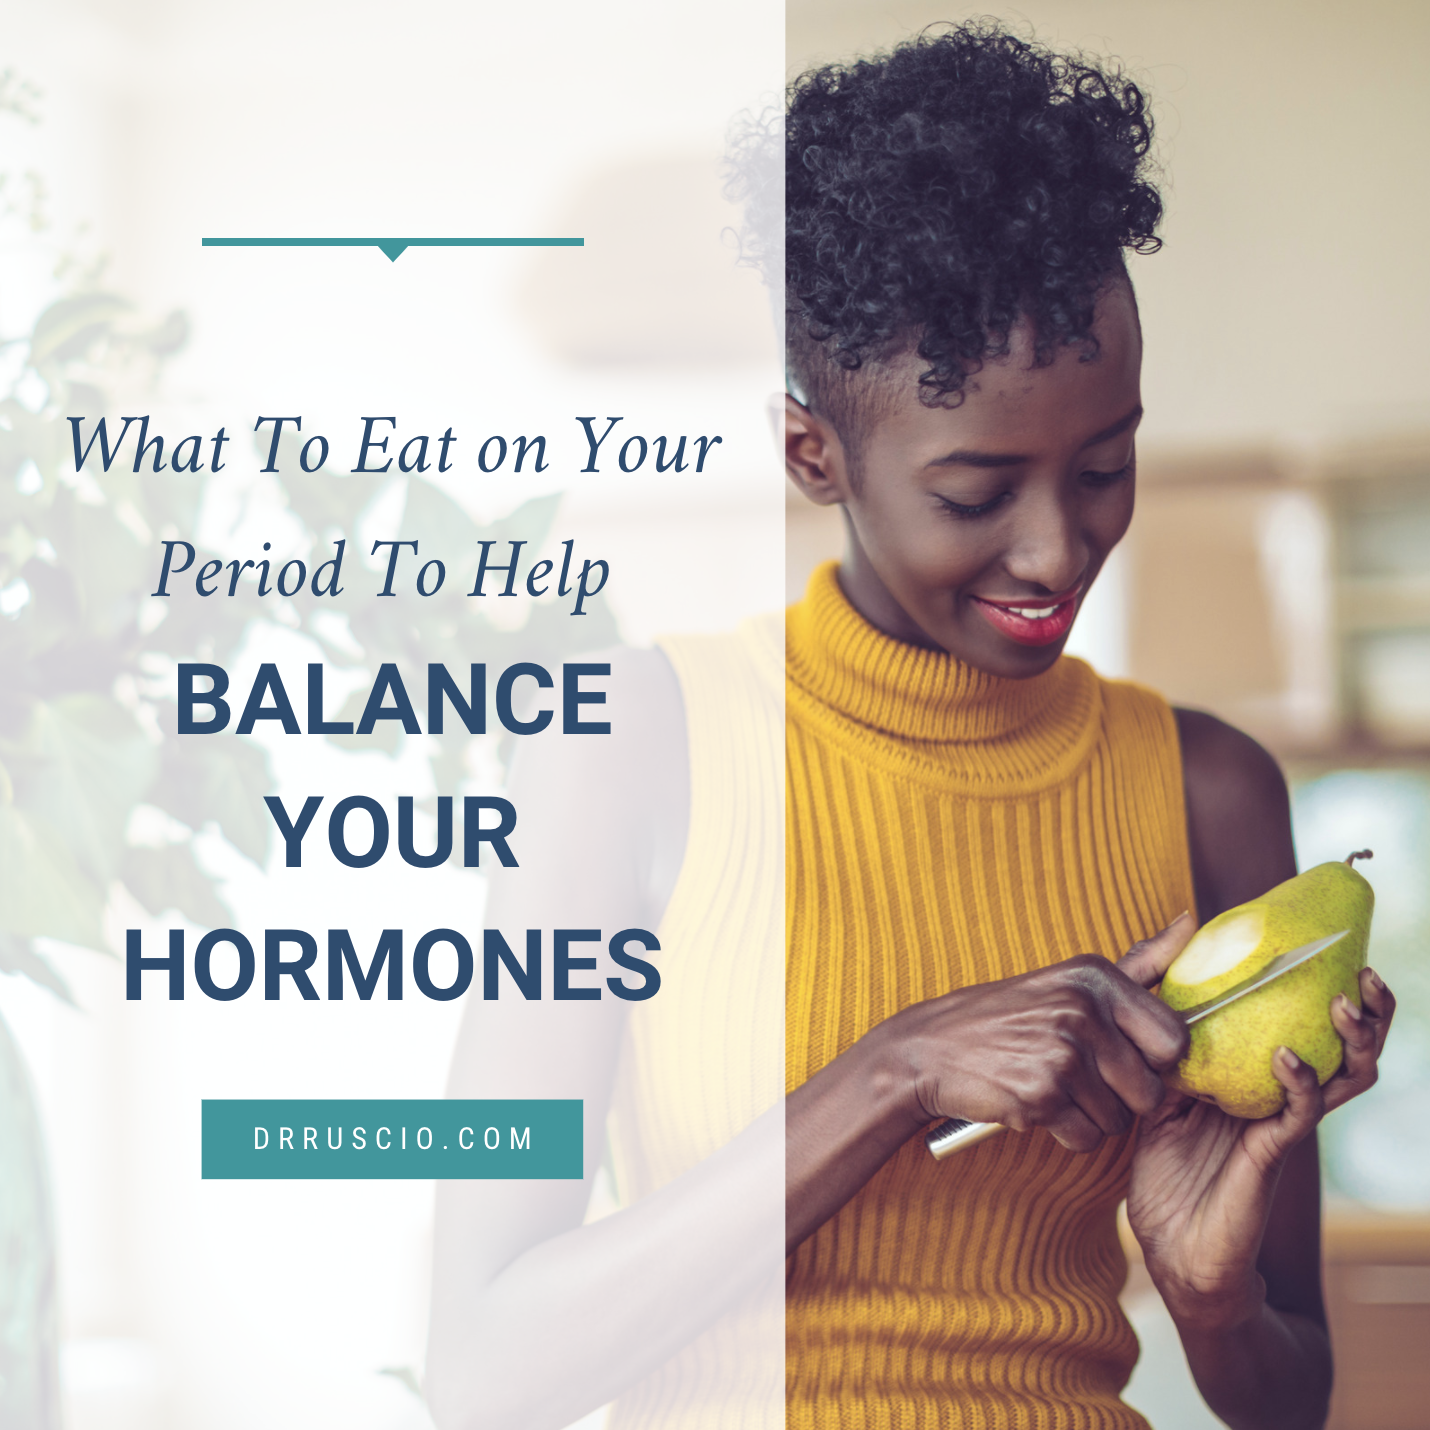 What To Eat on Your Period To Help Balance Your Hormones